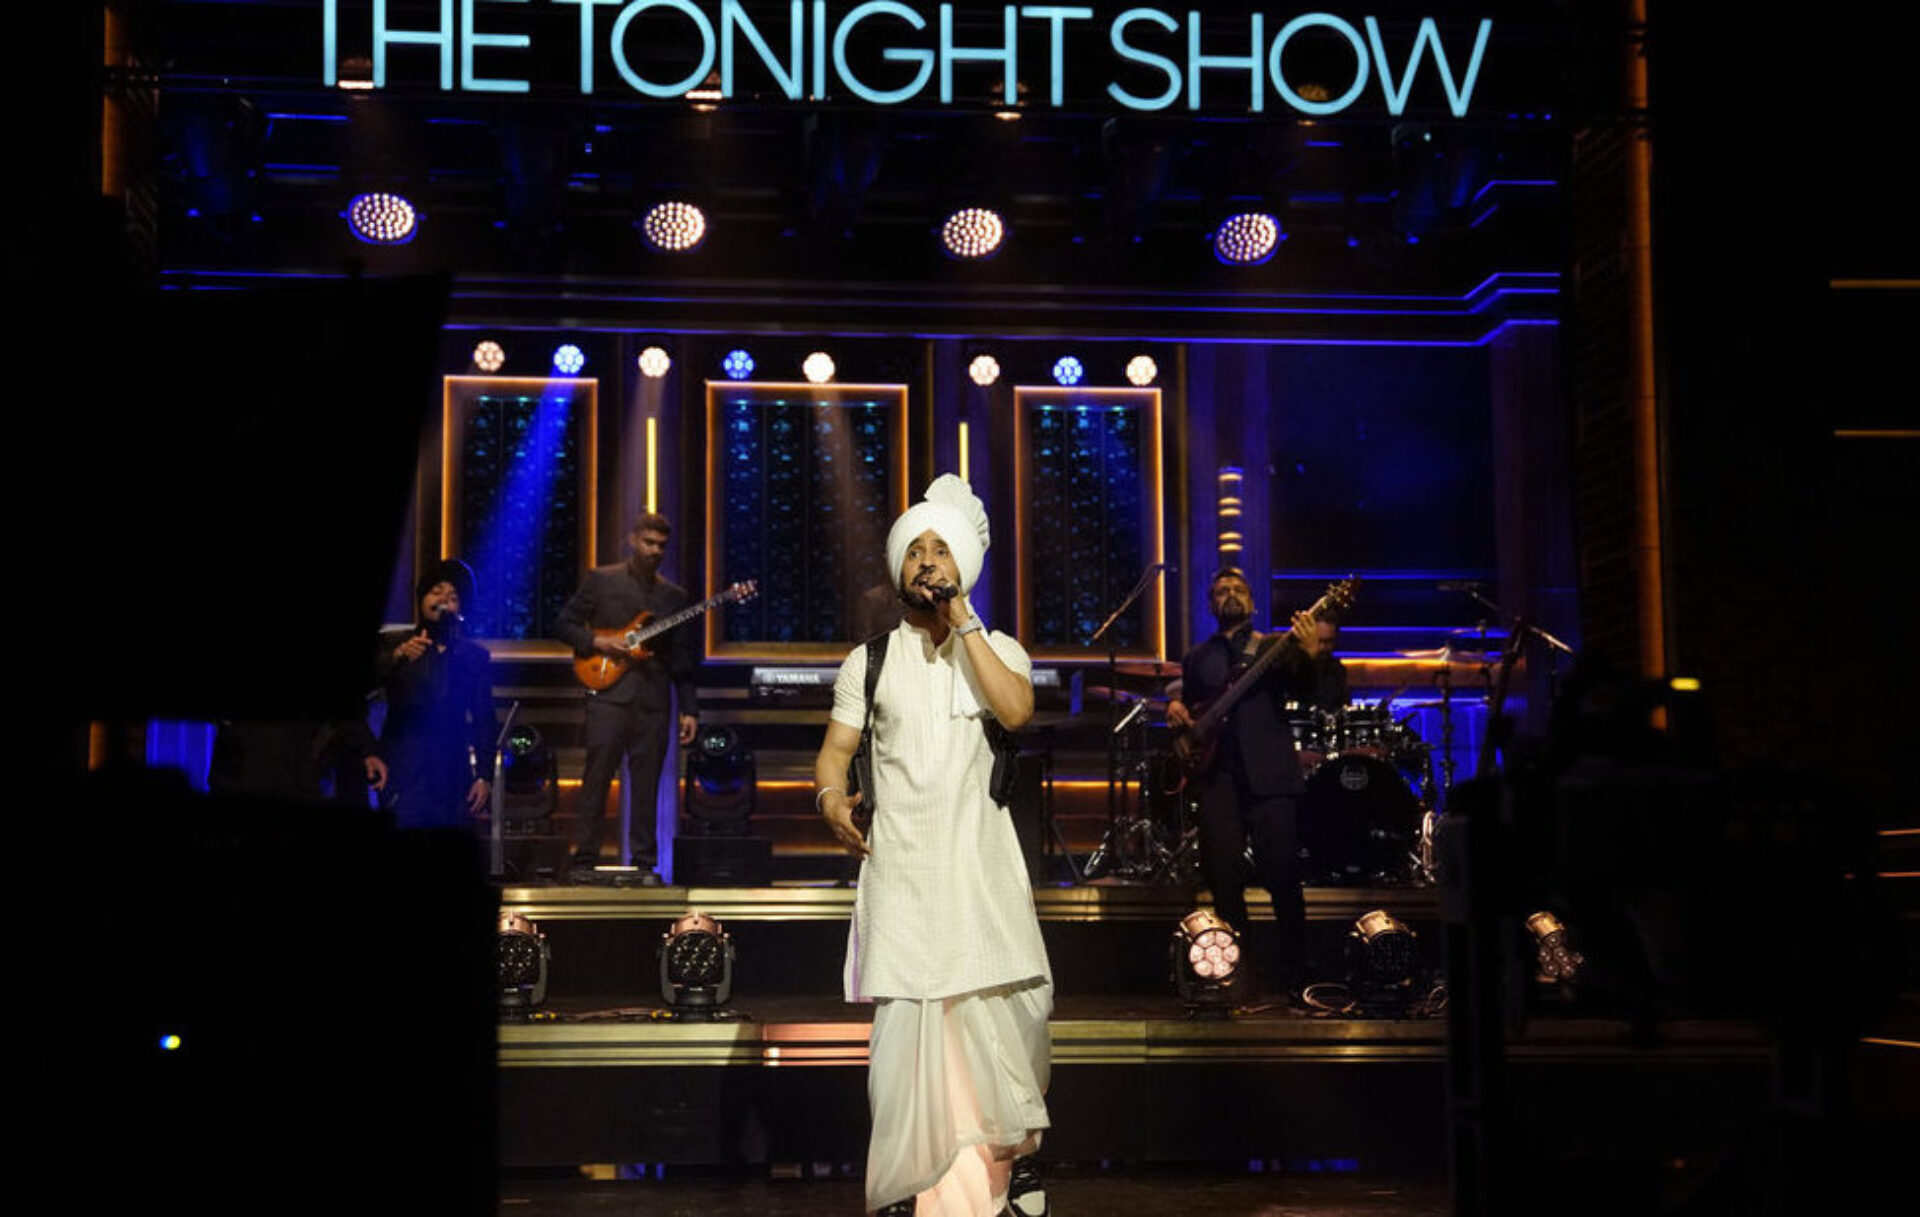 Diljit Dosanjh, the Punjabi superstar, made his first American television debut on The Tonight Show Starring Jimmy Fallon.